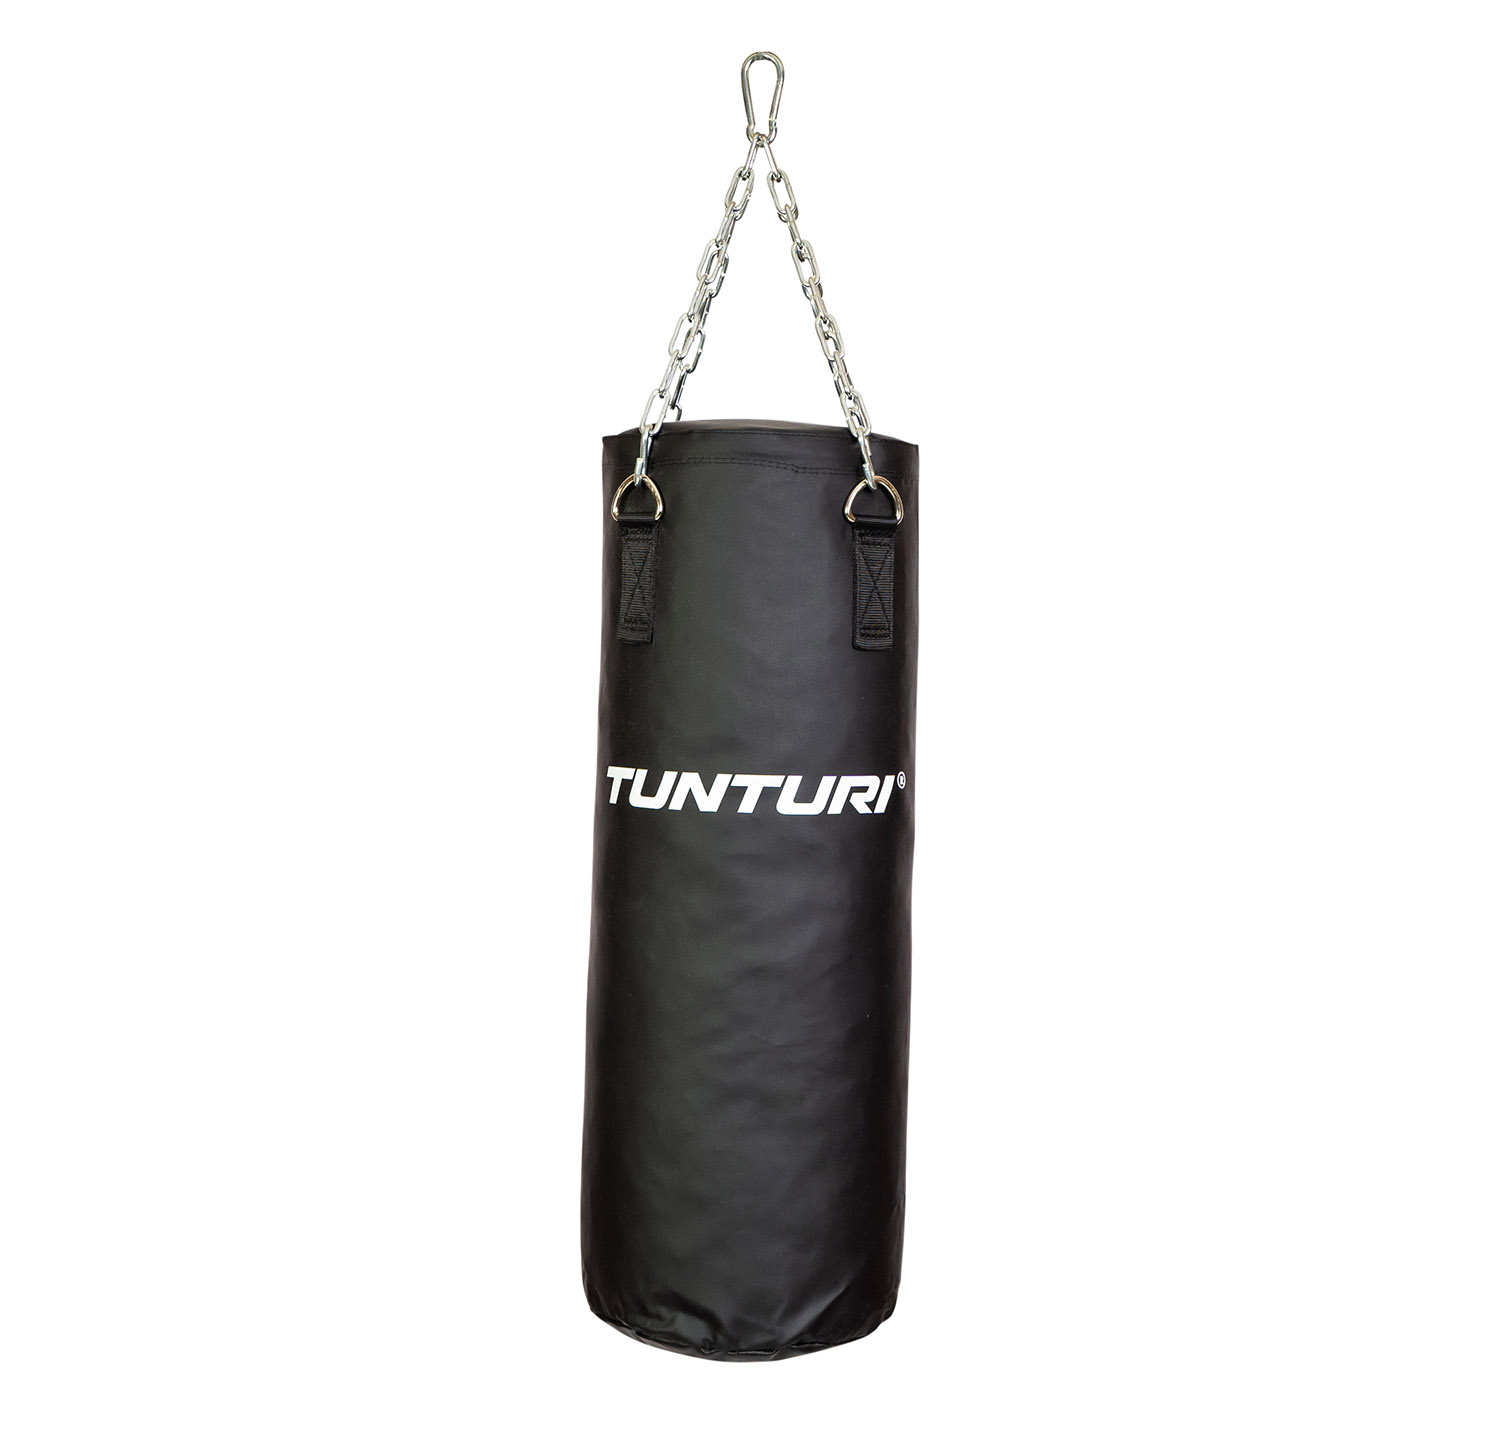 Boxing Bag, Incl. Chain